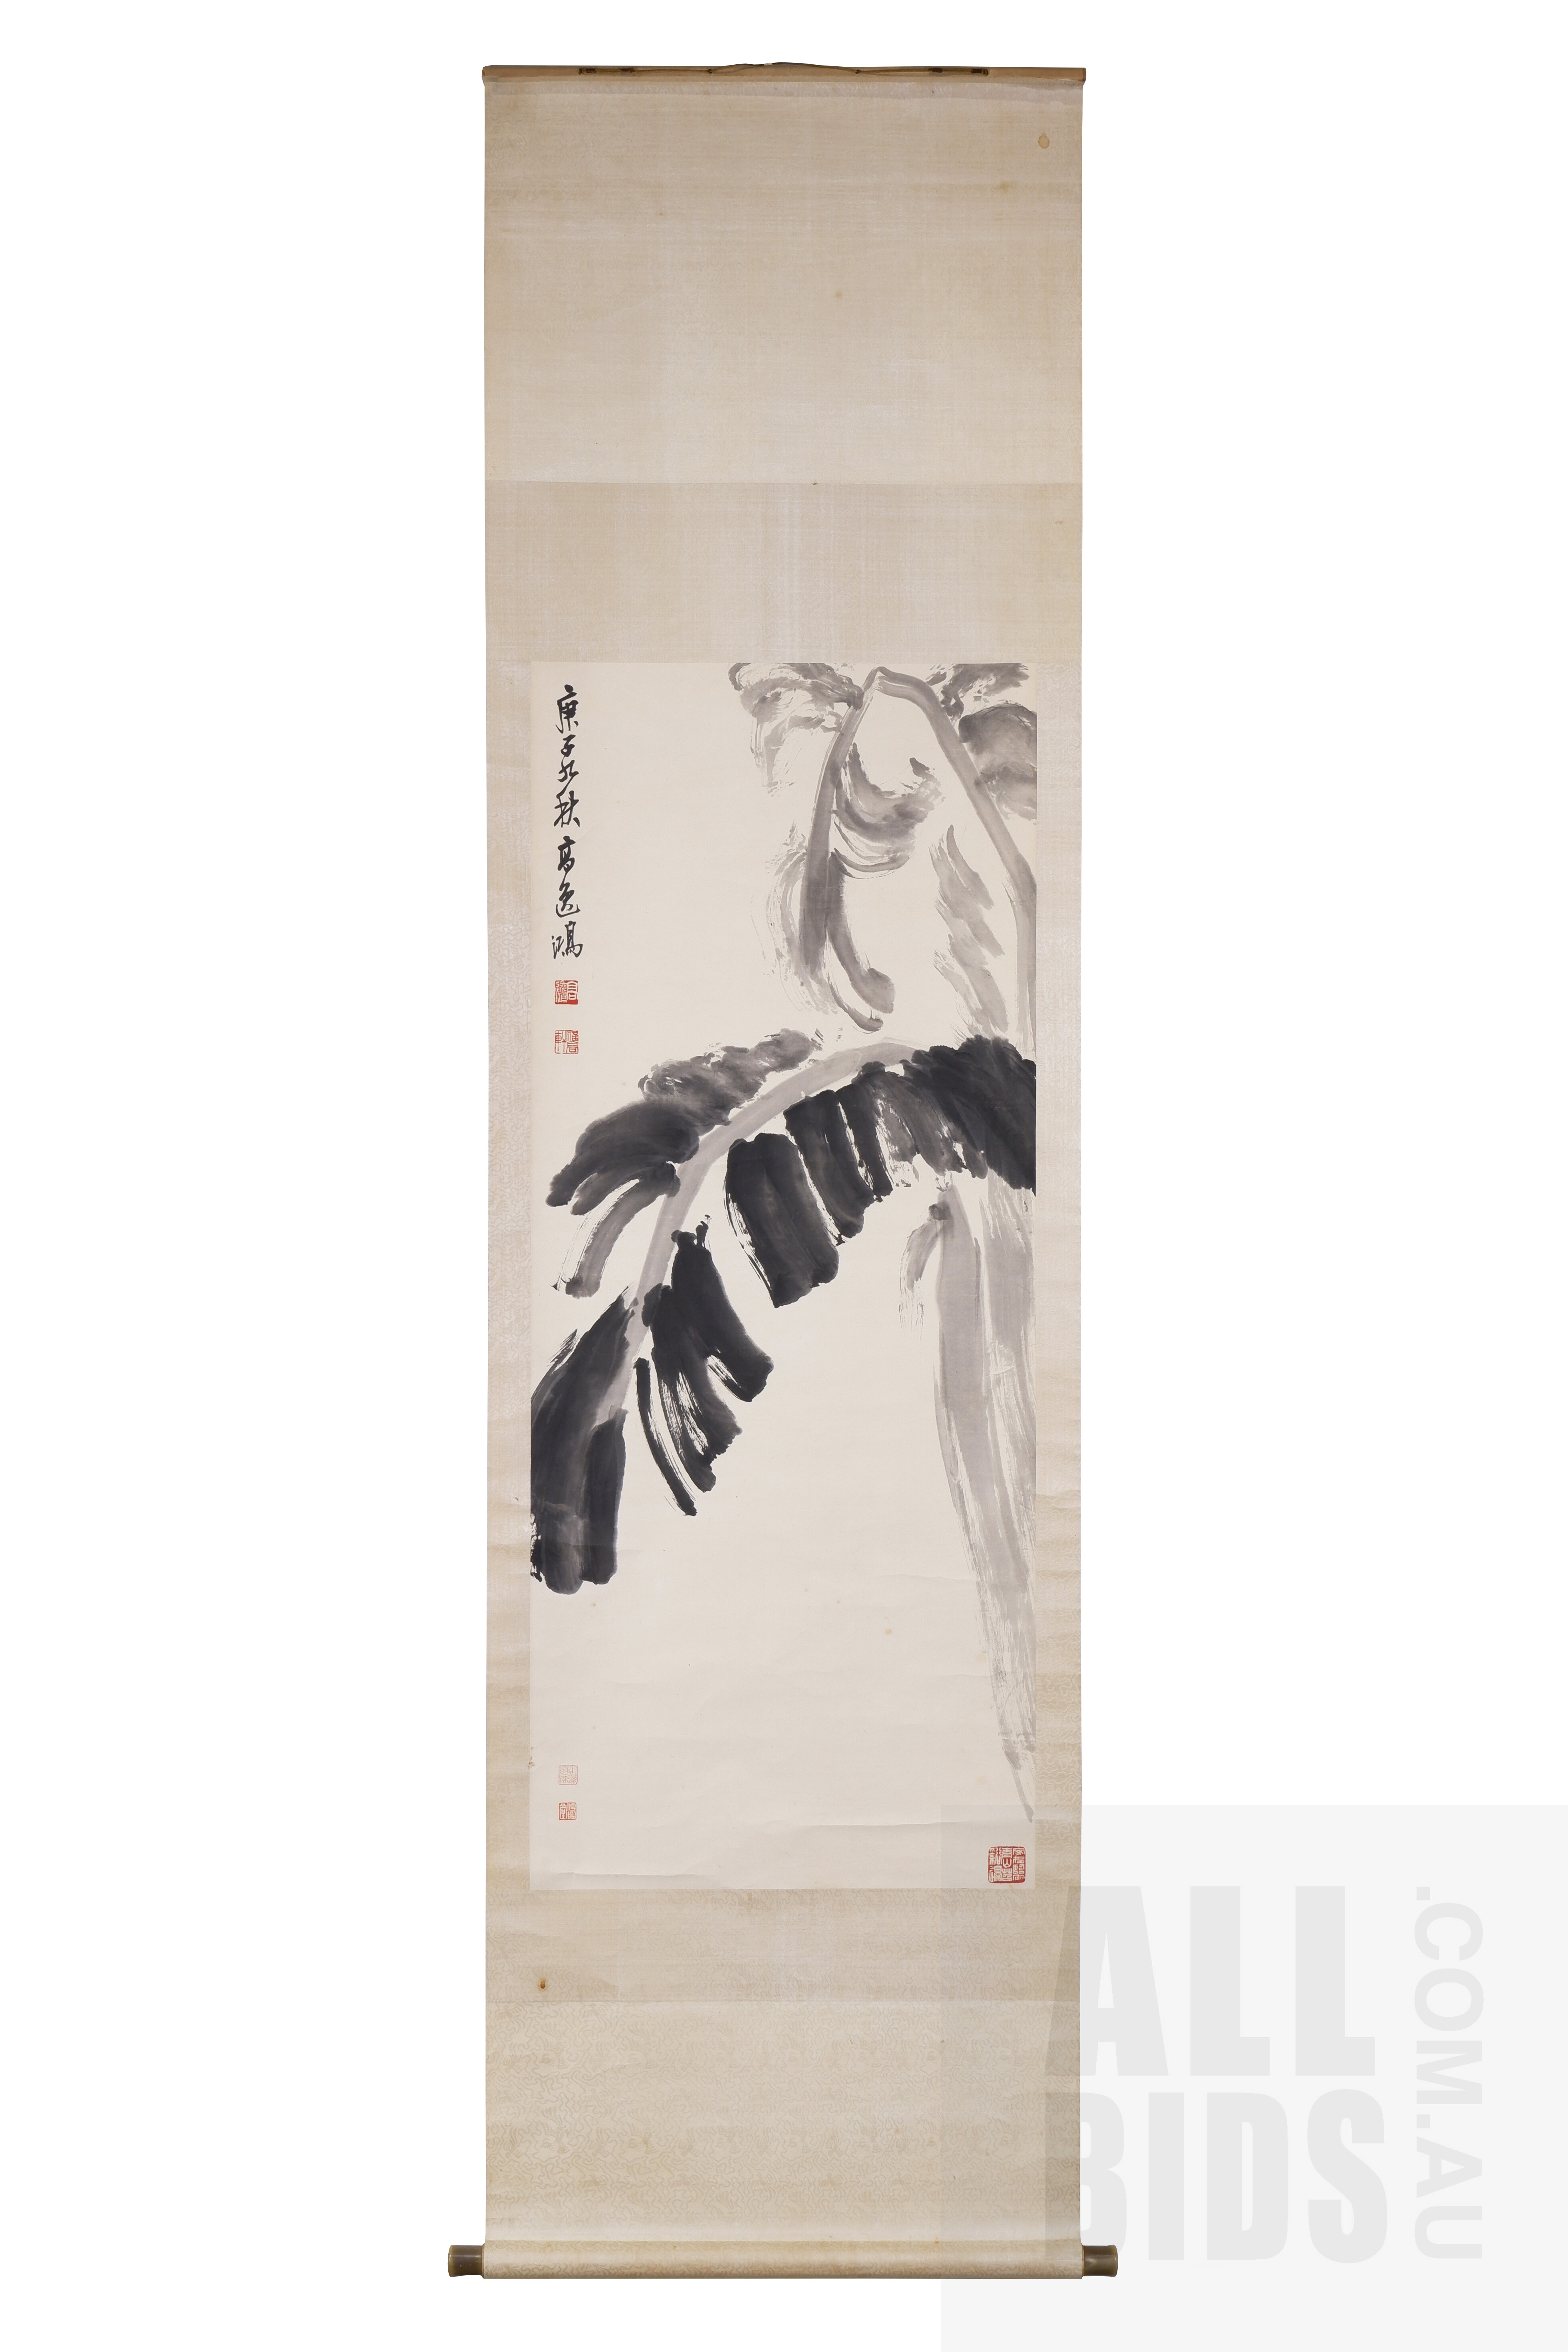 'GAO Yihong (Chinese 1908-1982) Palm Leaf with Calligraphy and Artists Seals, Ink on Paper with Mounted on Scroll with Silk Backing'